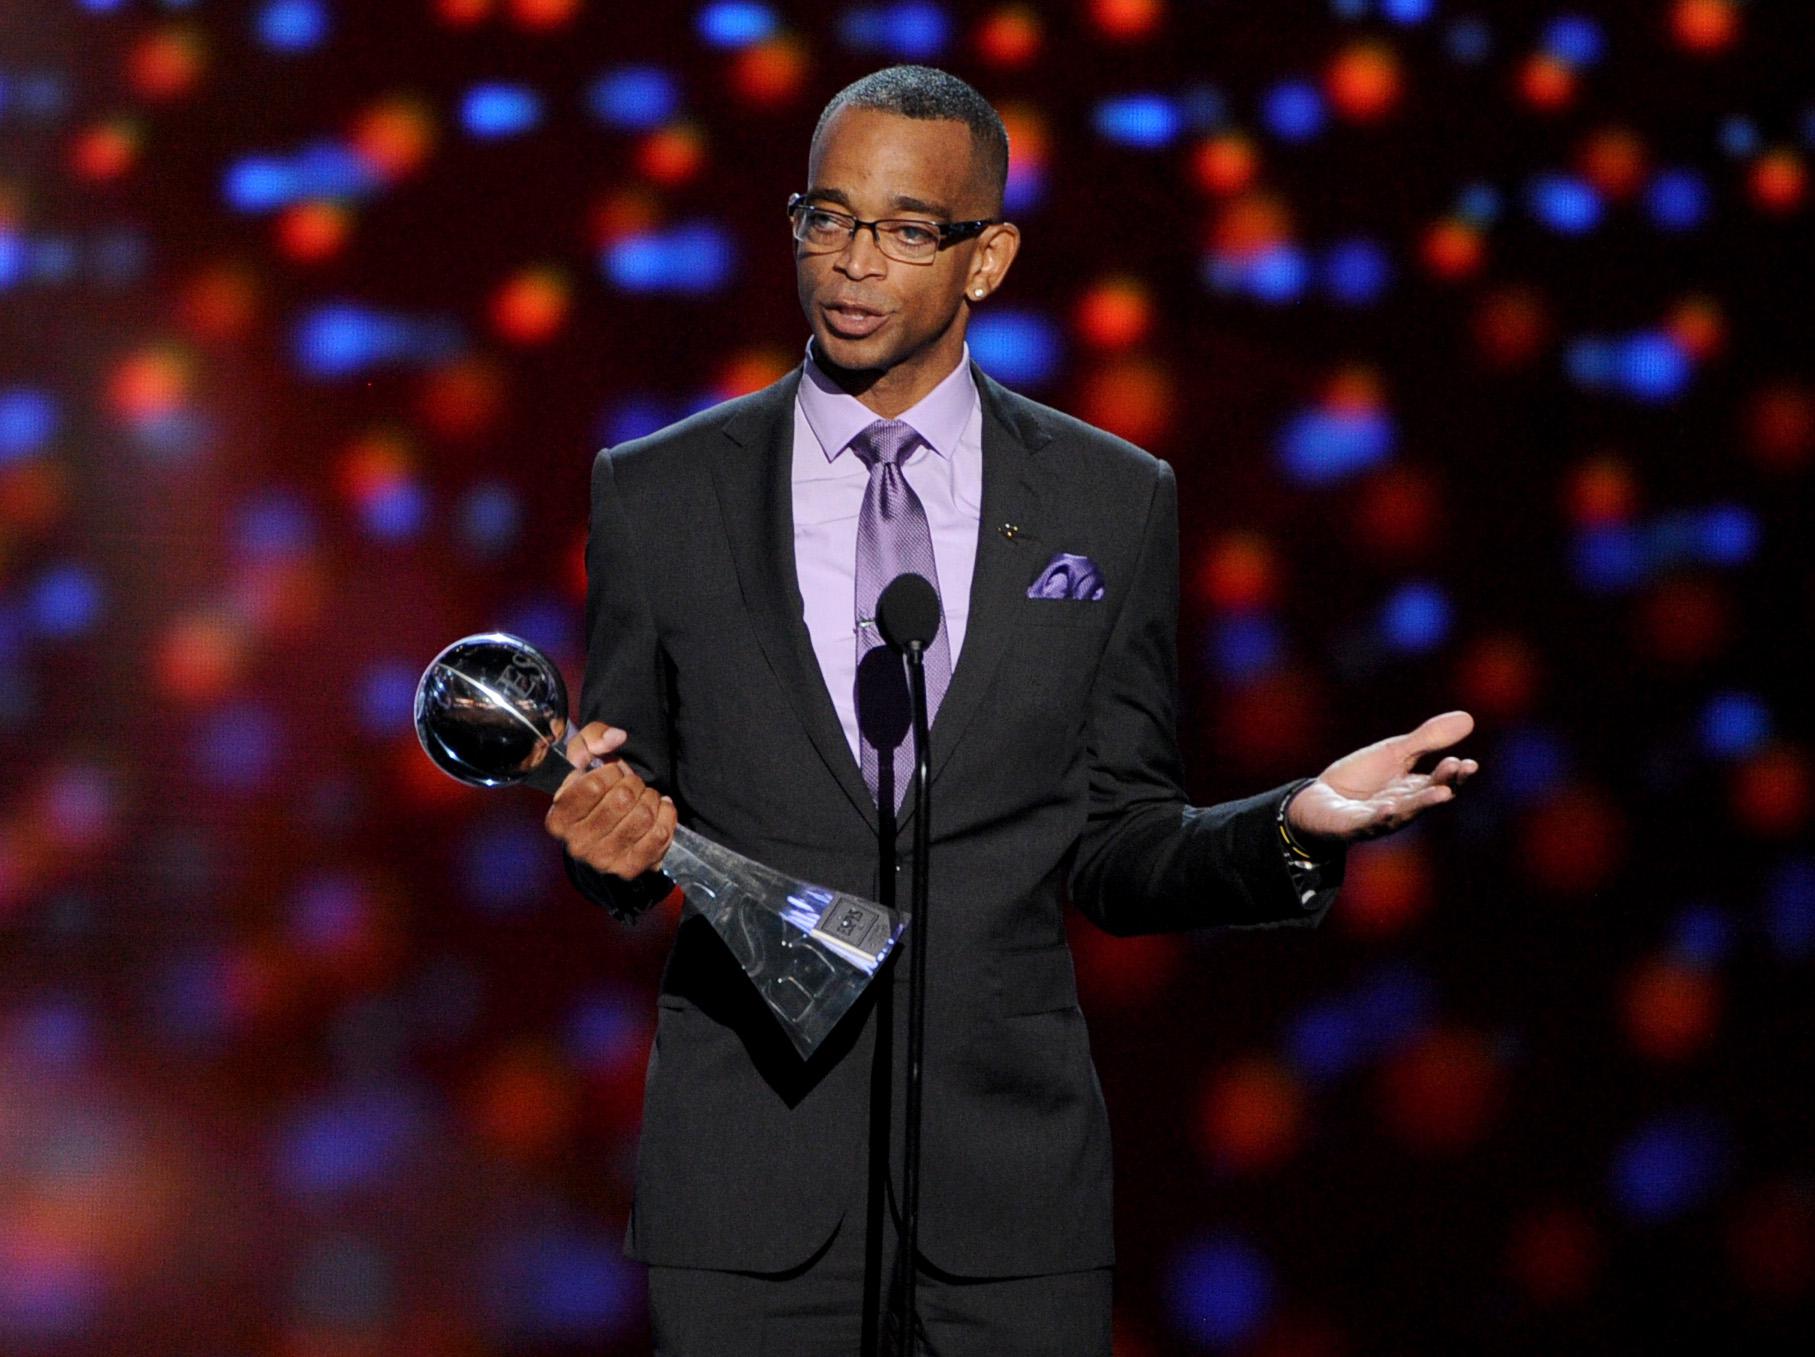 best espy speeches of all time